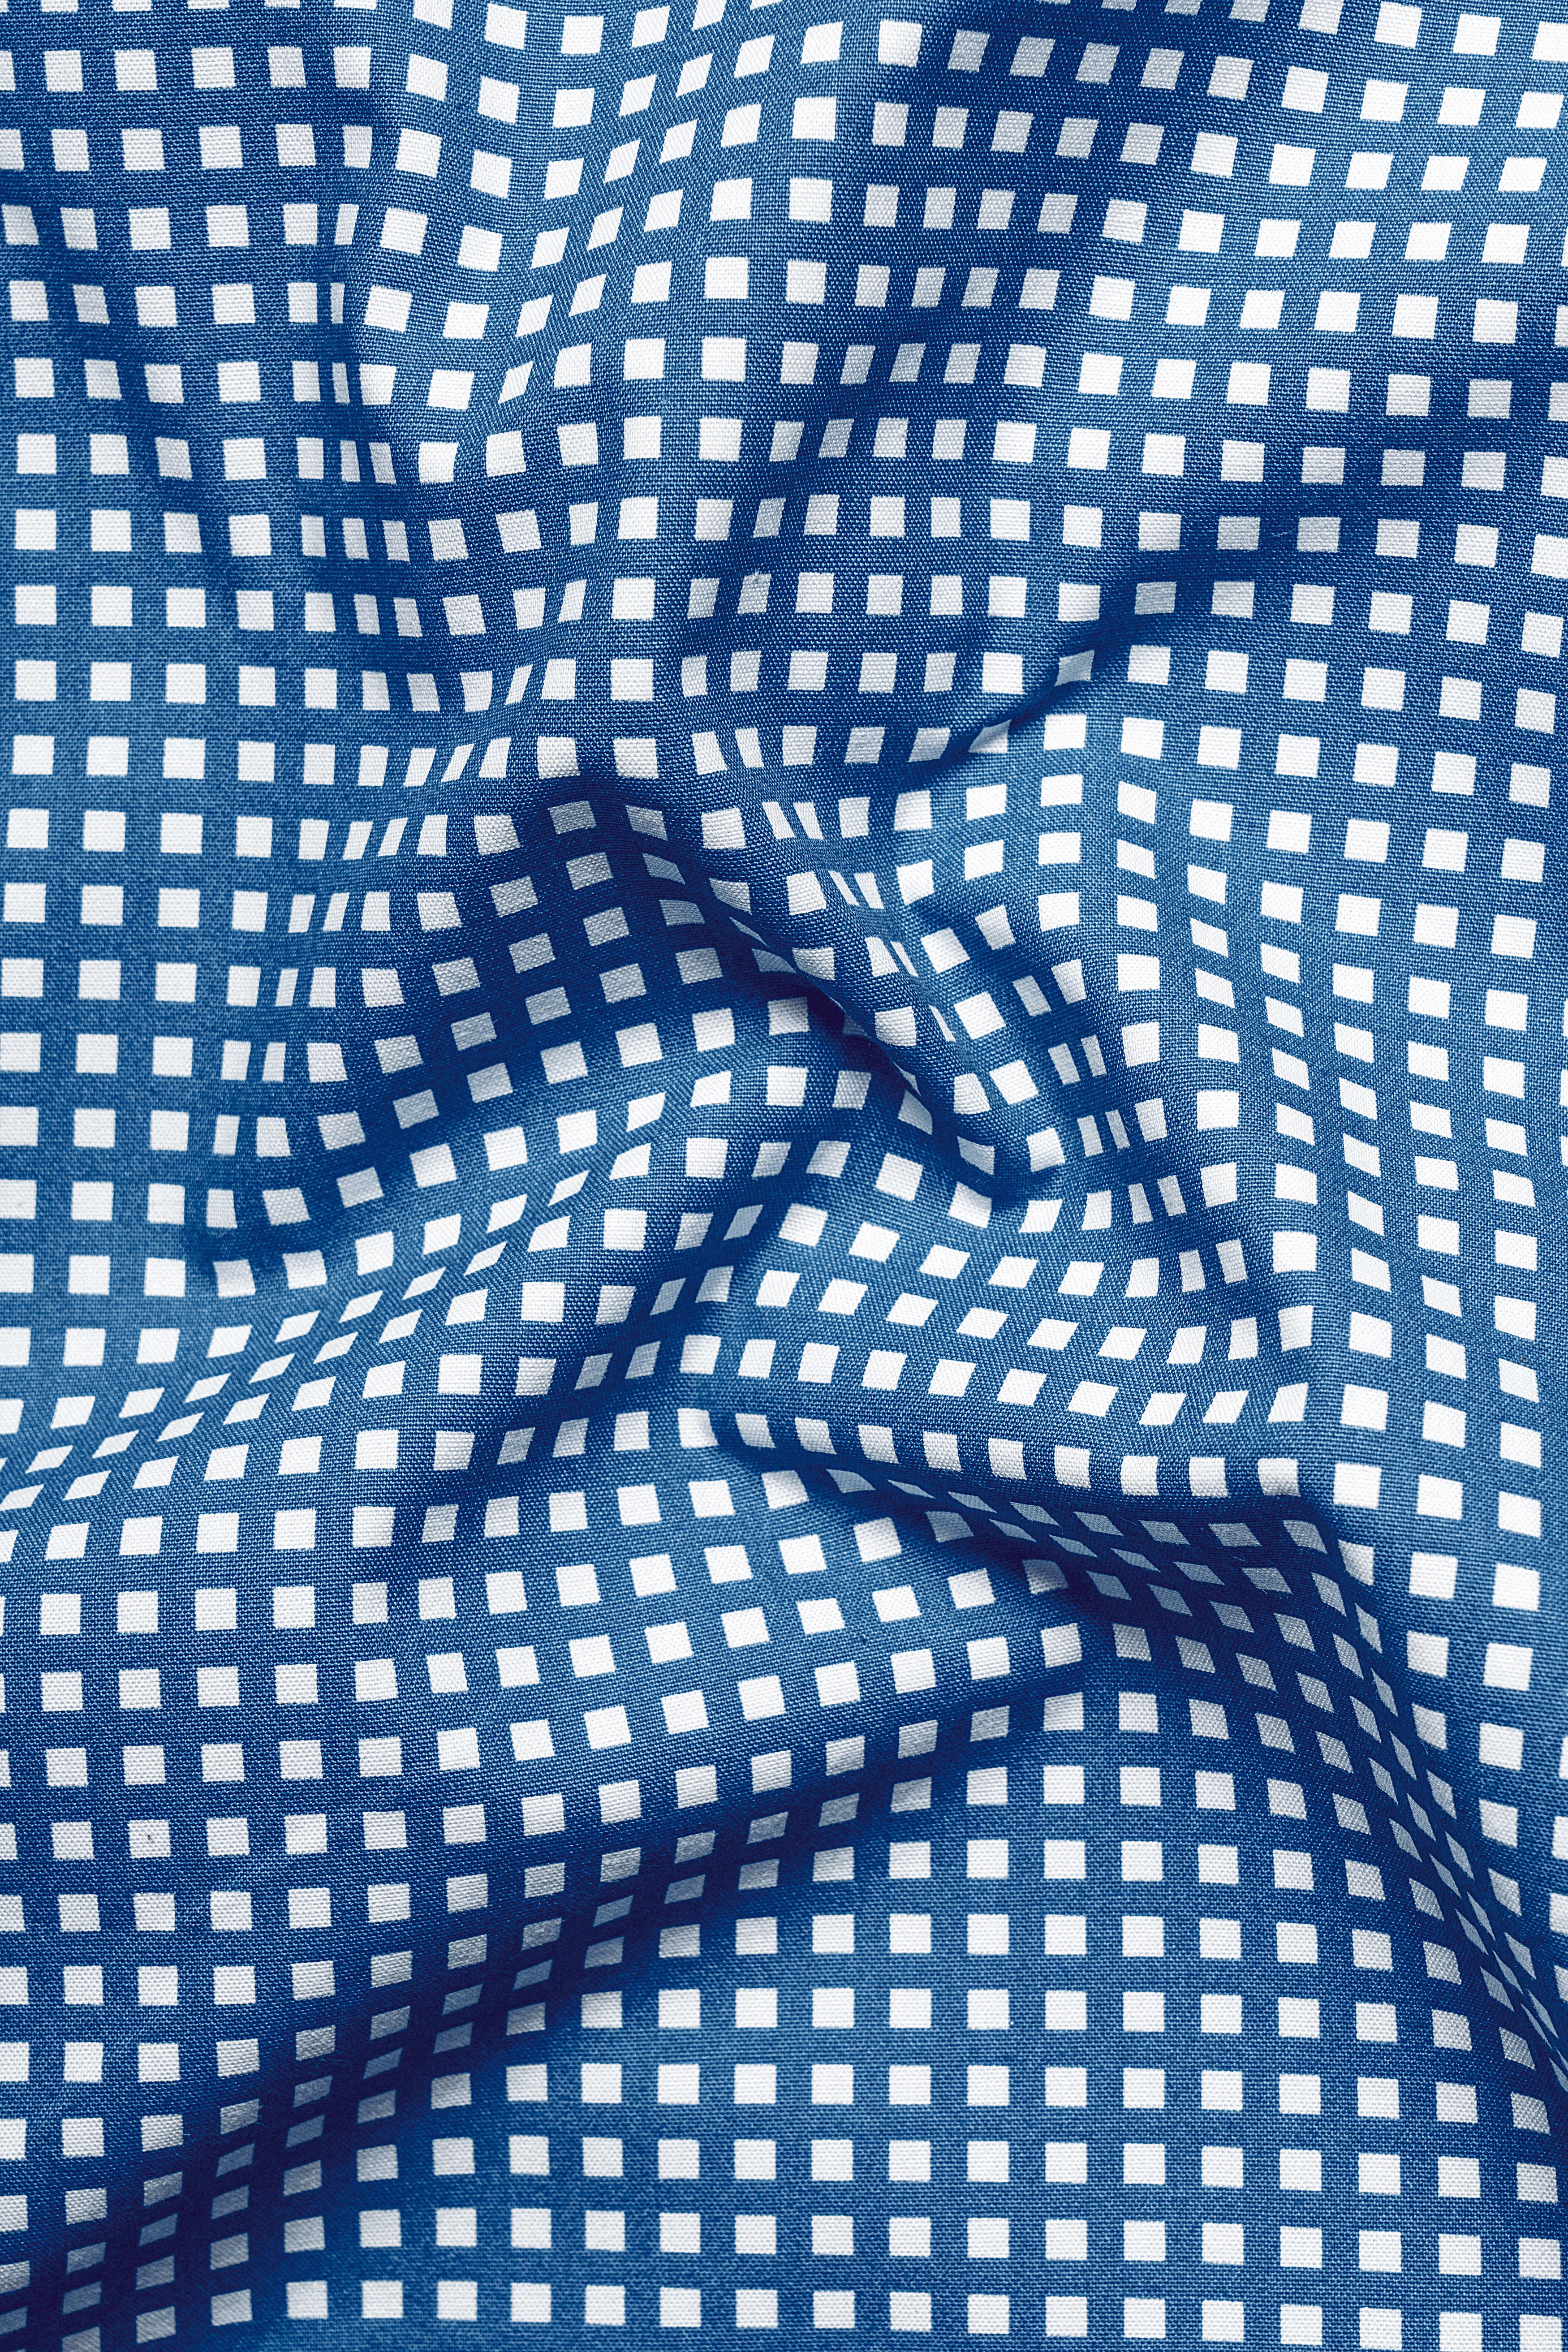 Regal Blue and White Micro Square Dotted Heavy Weight Oxford Shirt